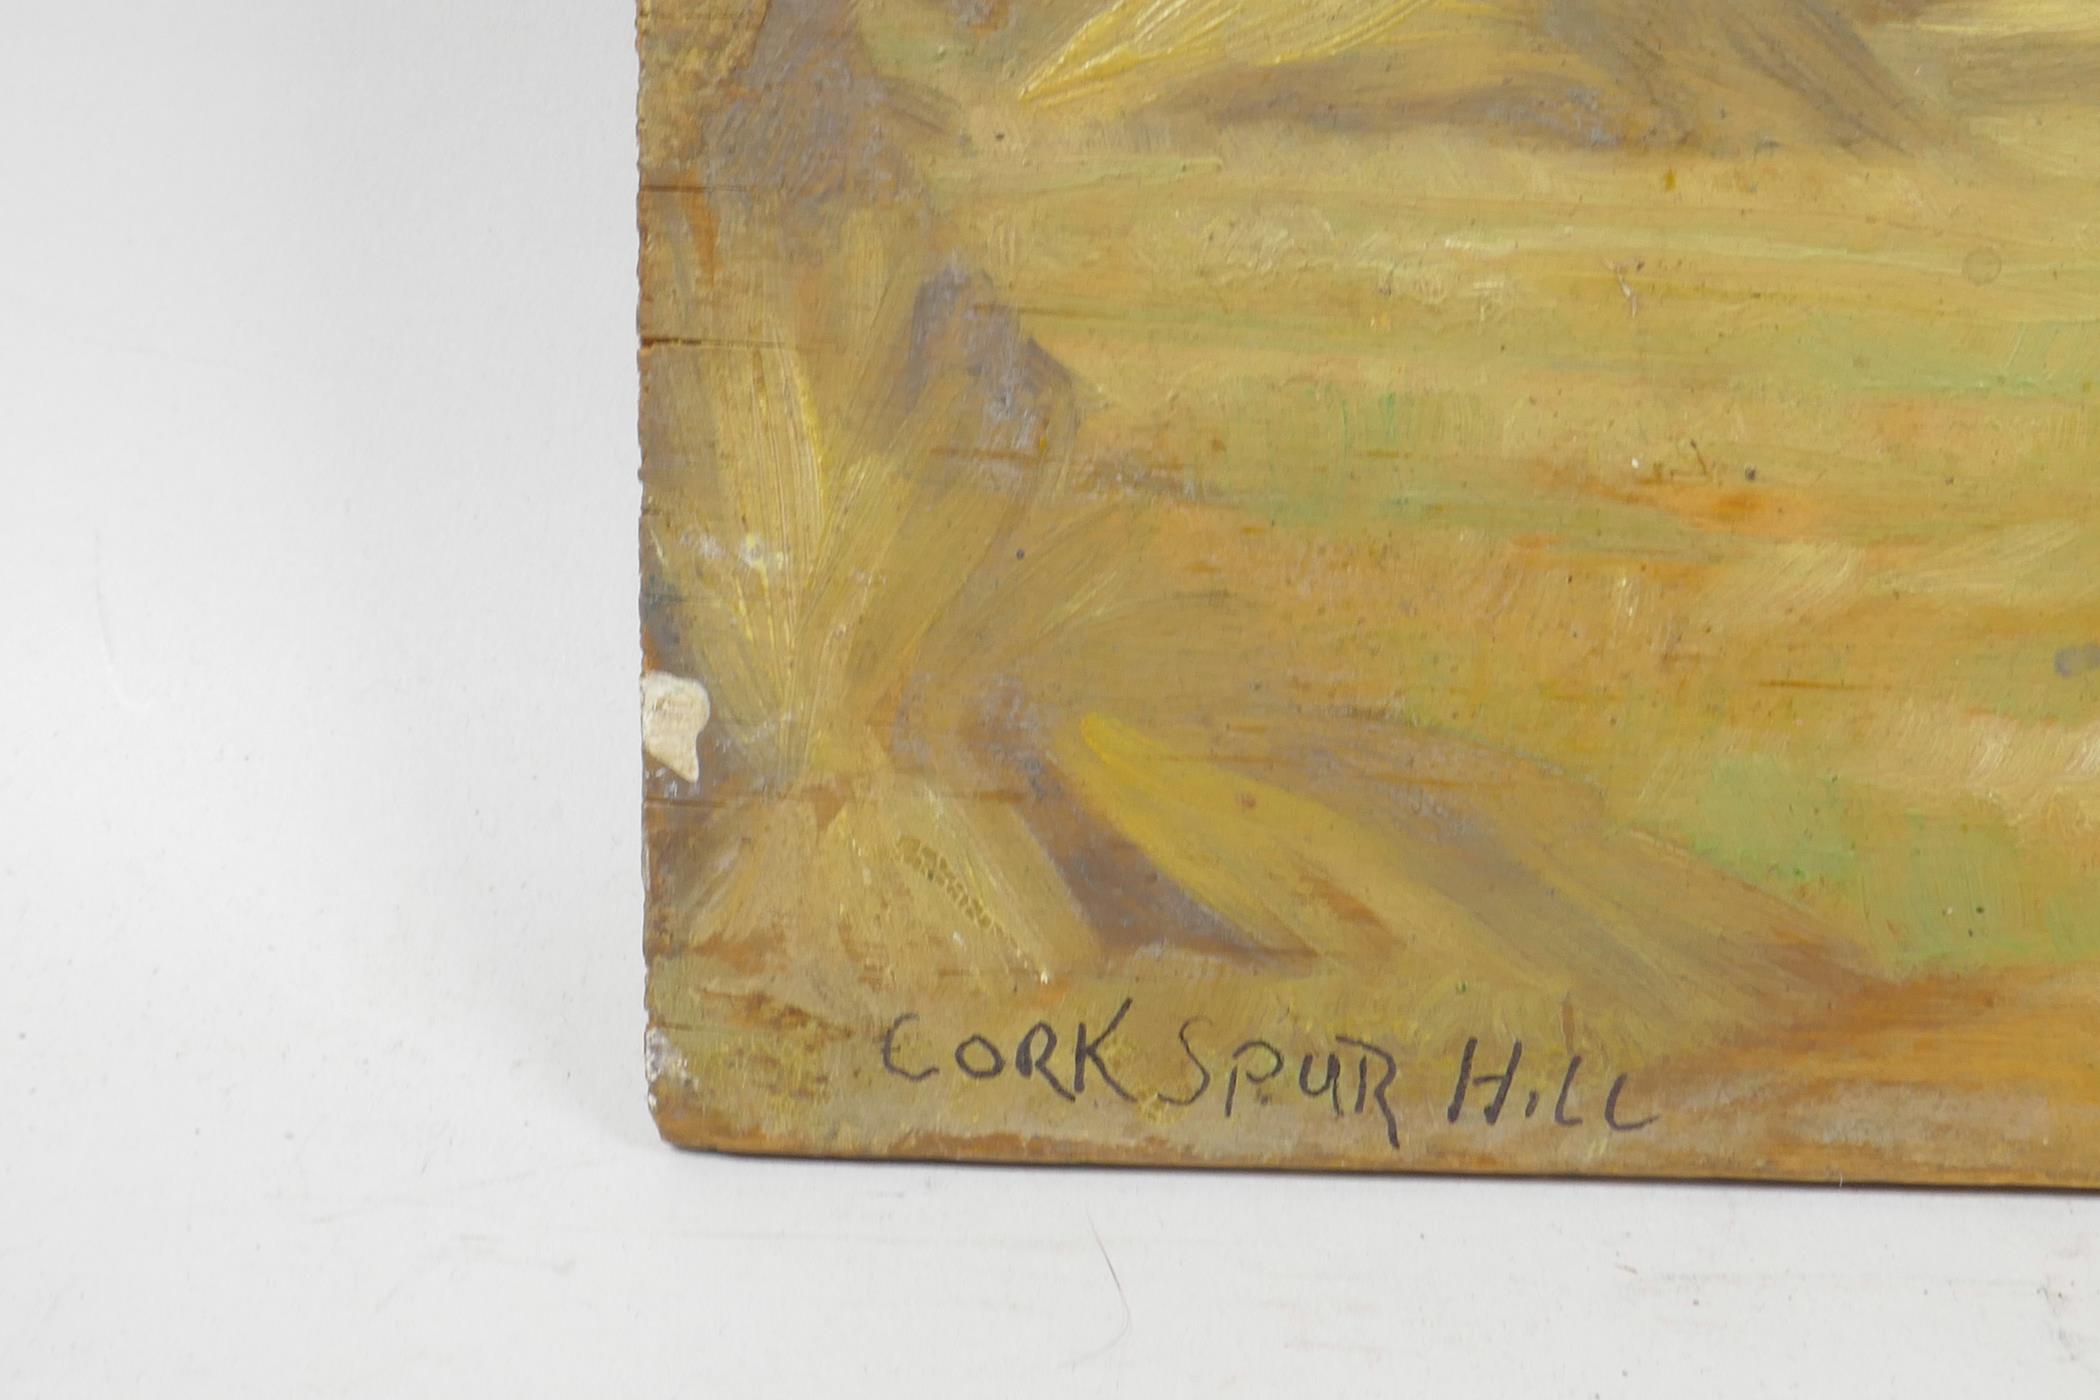 Irish landscape, Spur Hill, Cork, signed A. Ribes(?), oil on board, and a still life with fish - Image 5 of 6